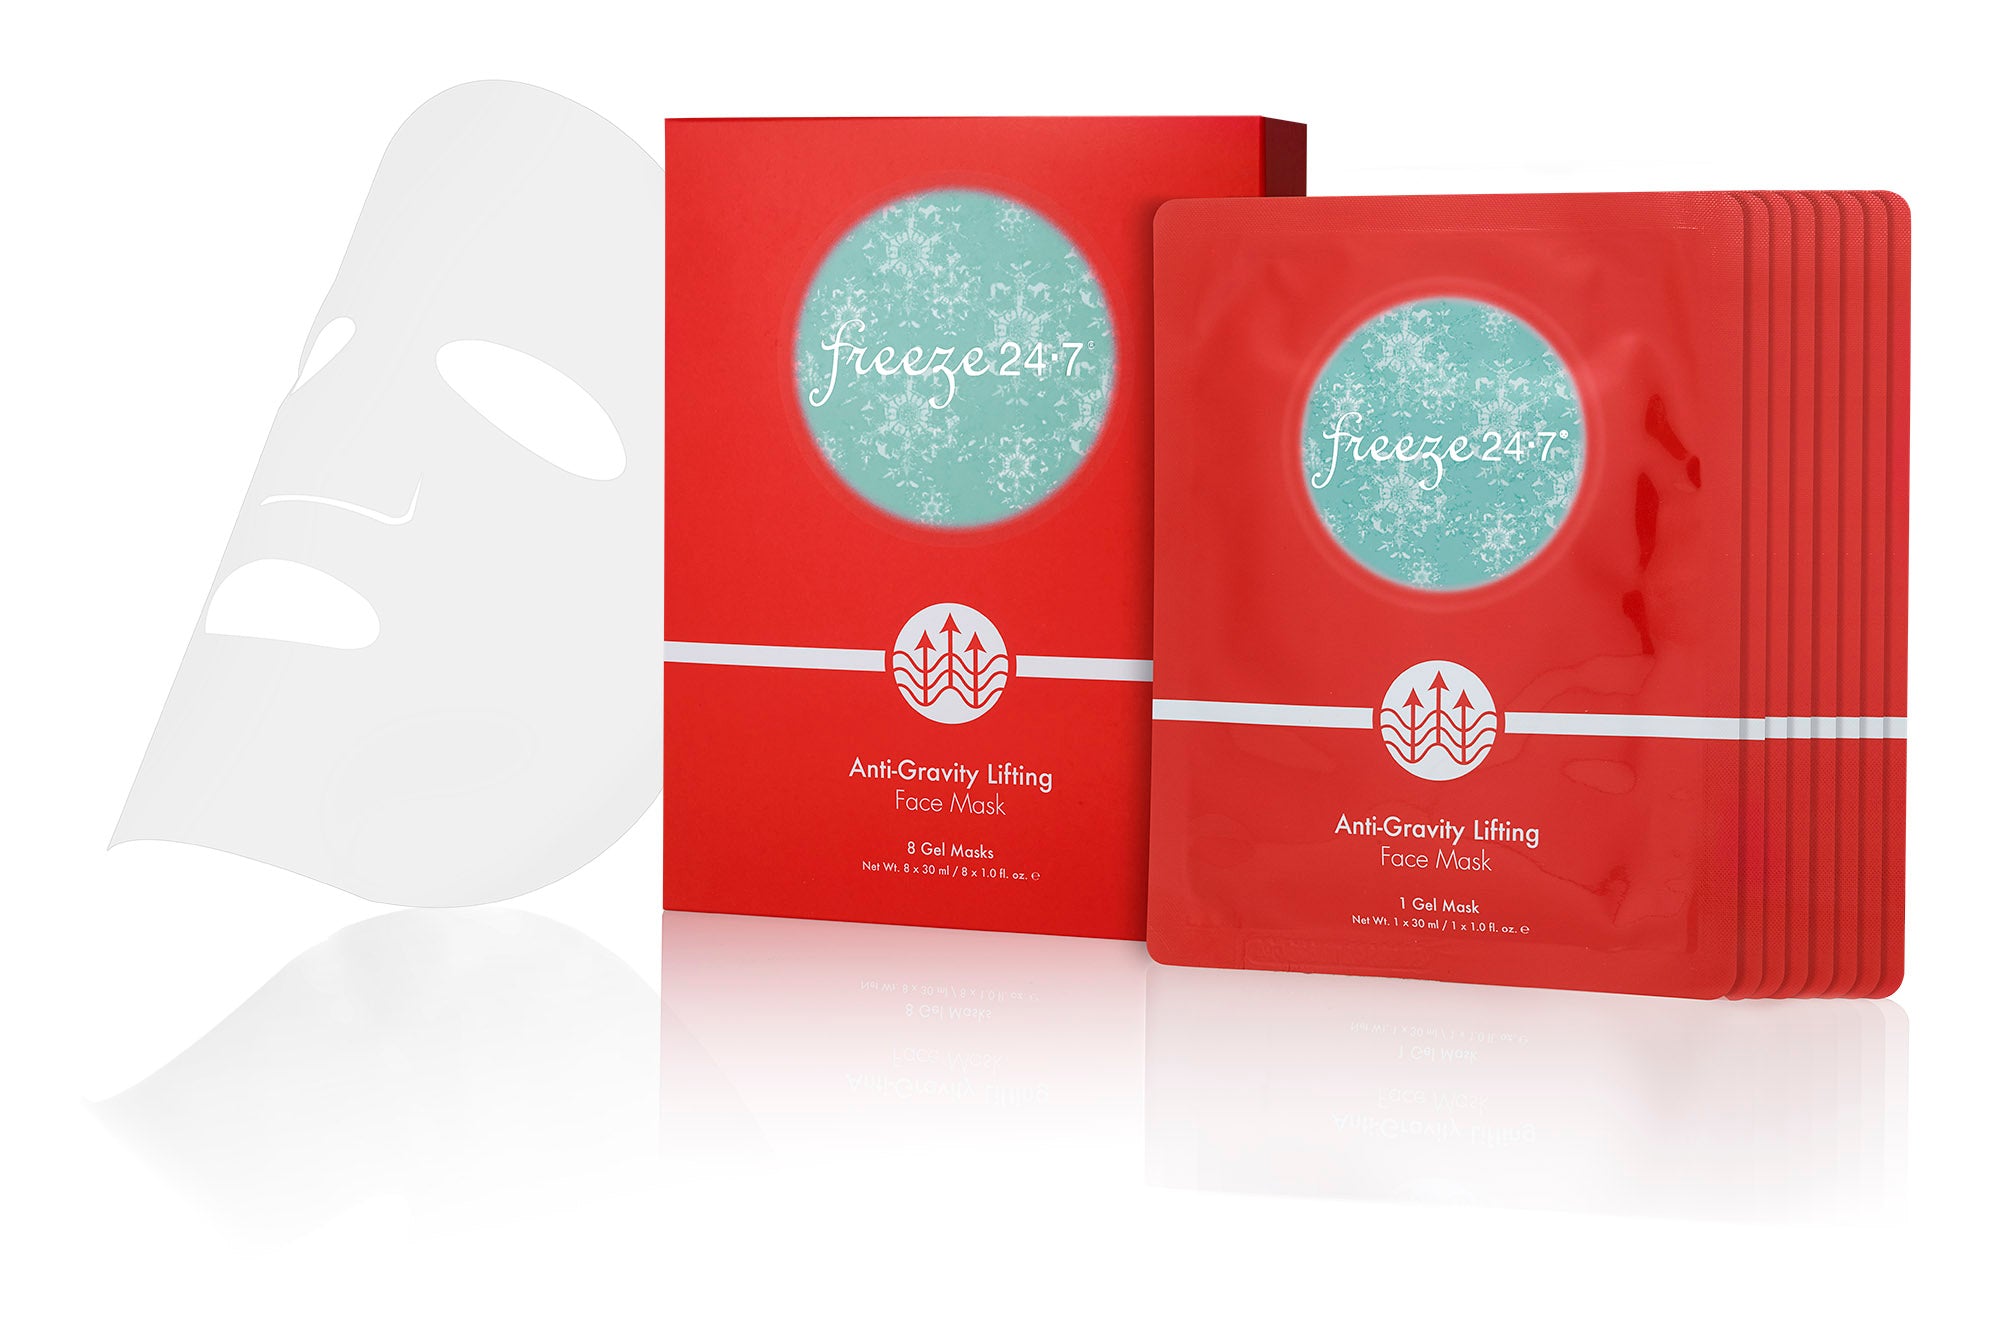 Review, Ingredients: Freeze 24-7 Anti-Gravity Lifting, Radiance Brightening, Intense Hydrating Face Masks